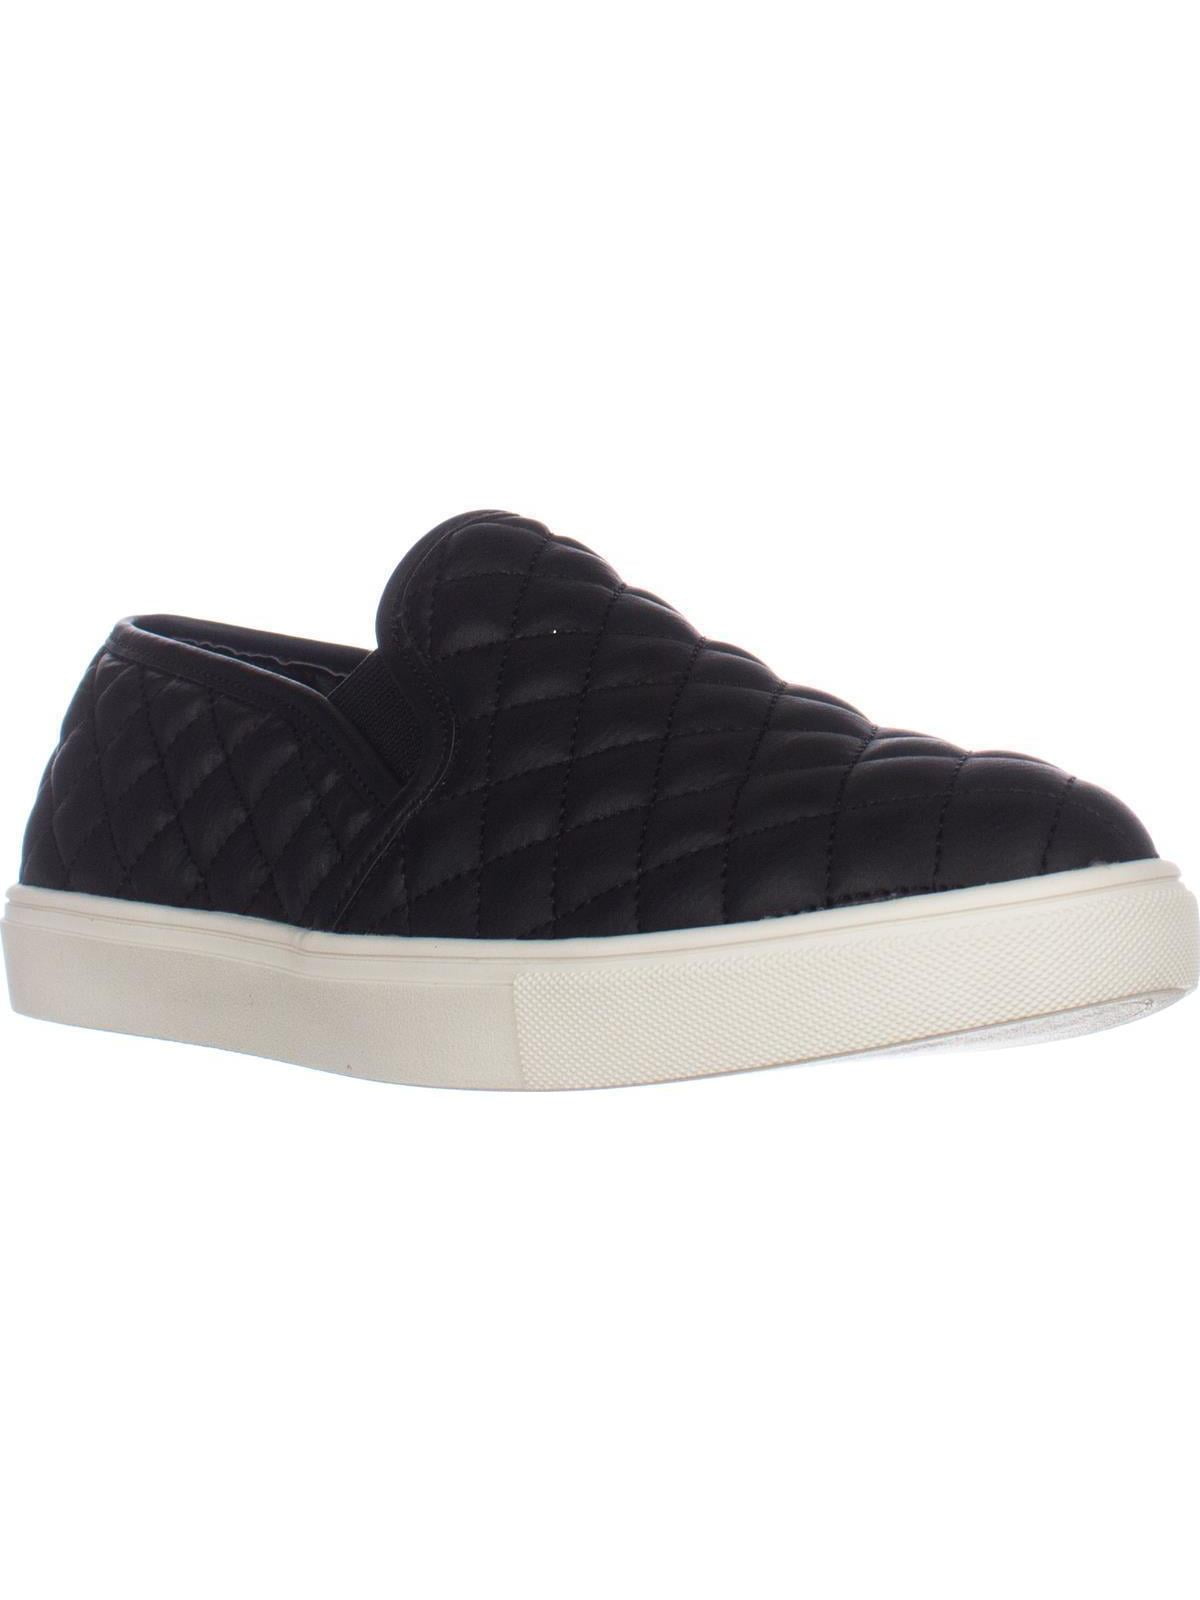 steve madden black quilted shoes